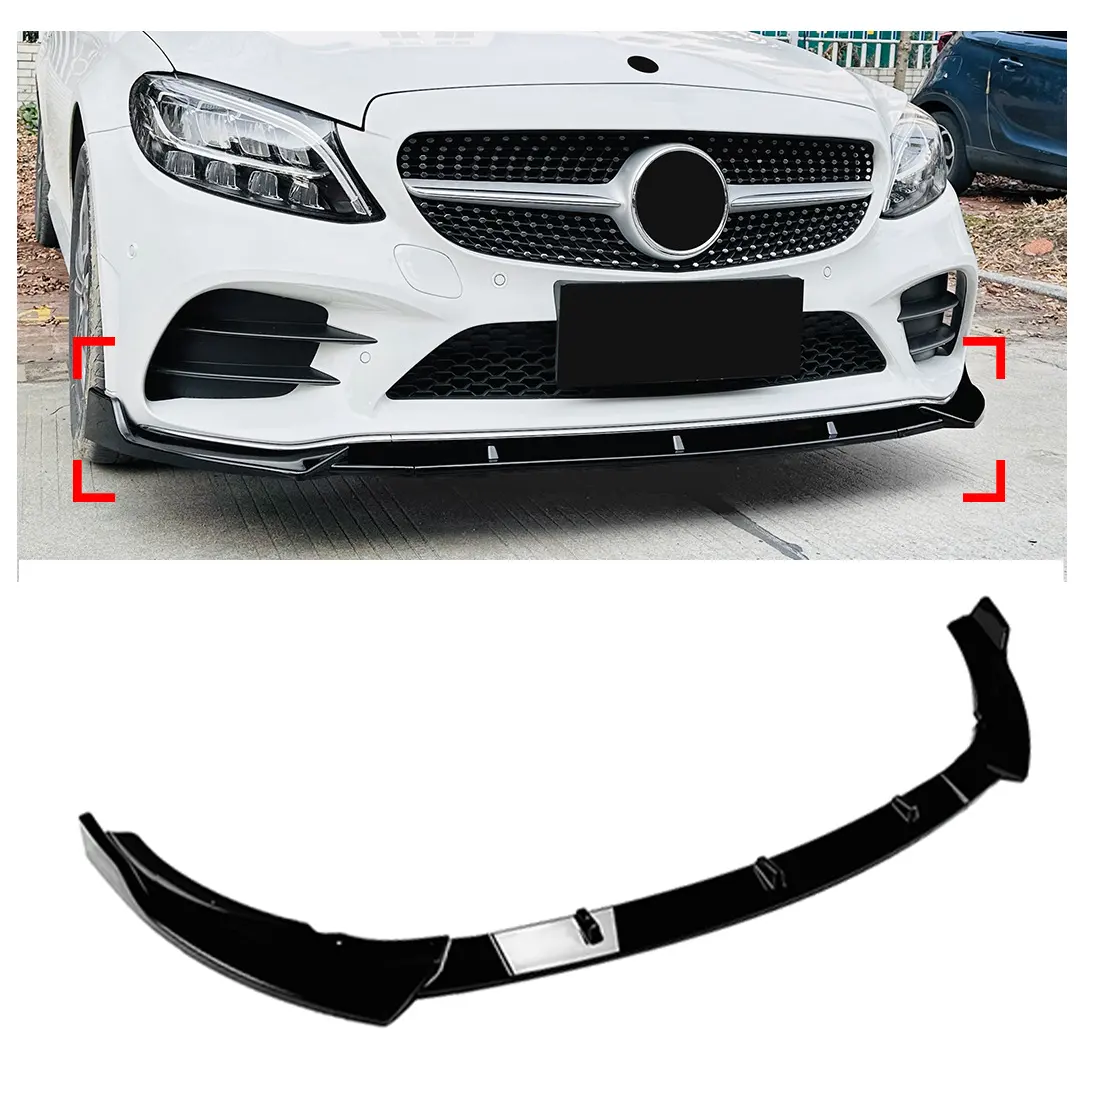 New product Modified ABS Car front bumper lip Glossy Black AMG front lip for Mercedes benz C Class W205 C205 S205 2019-2021